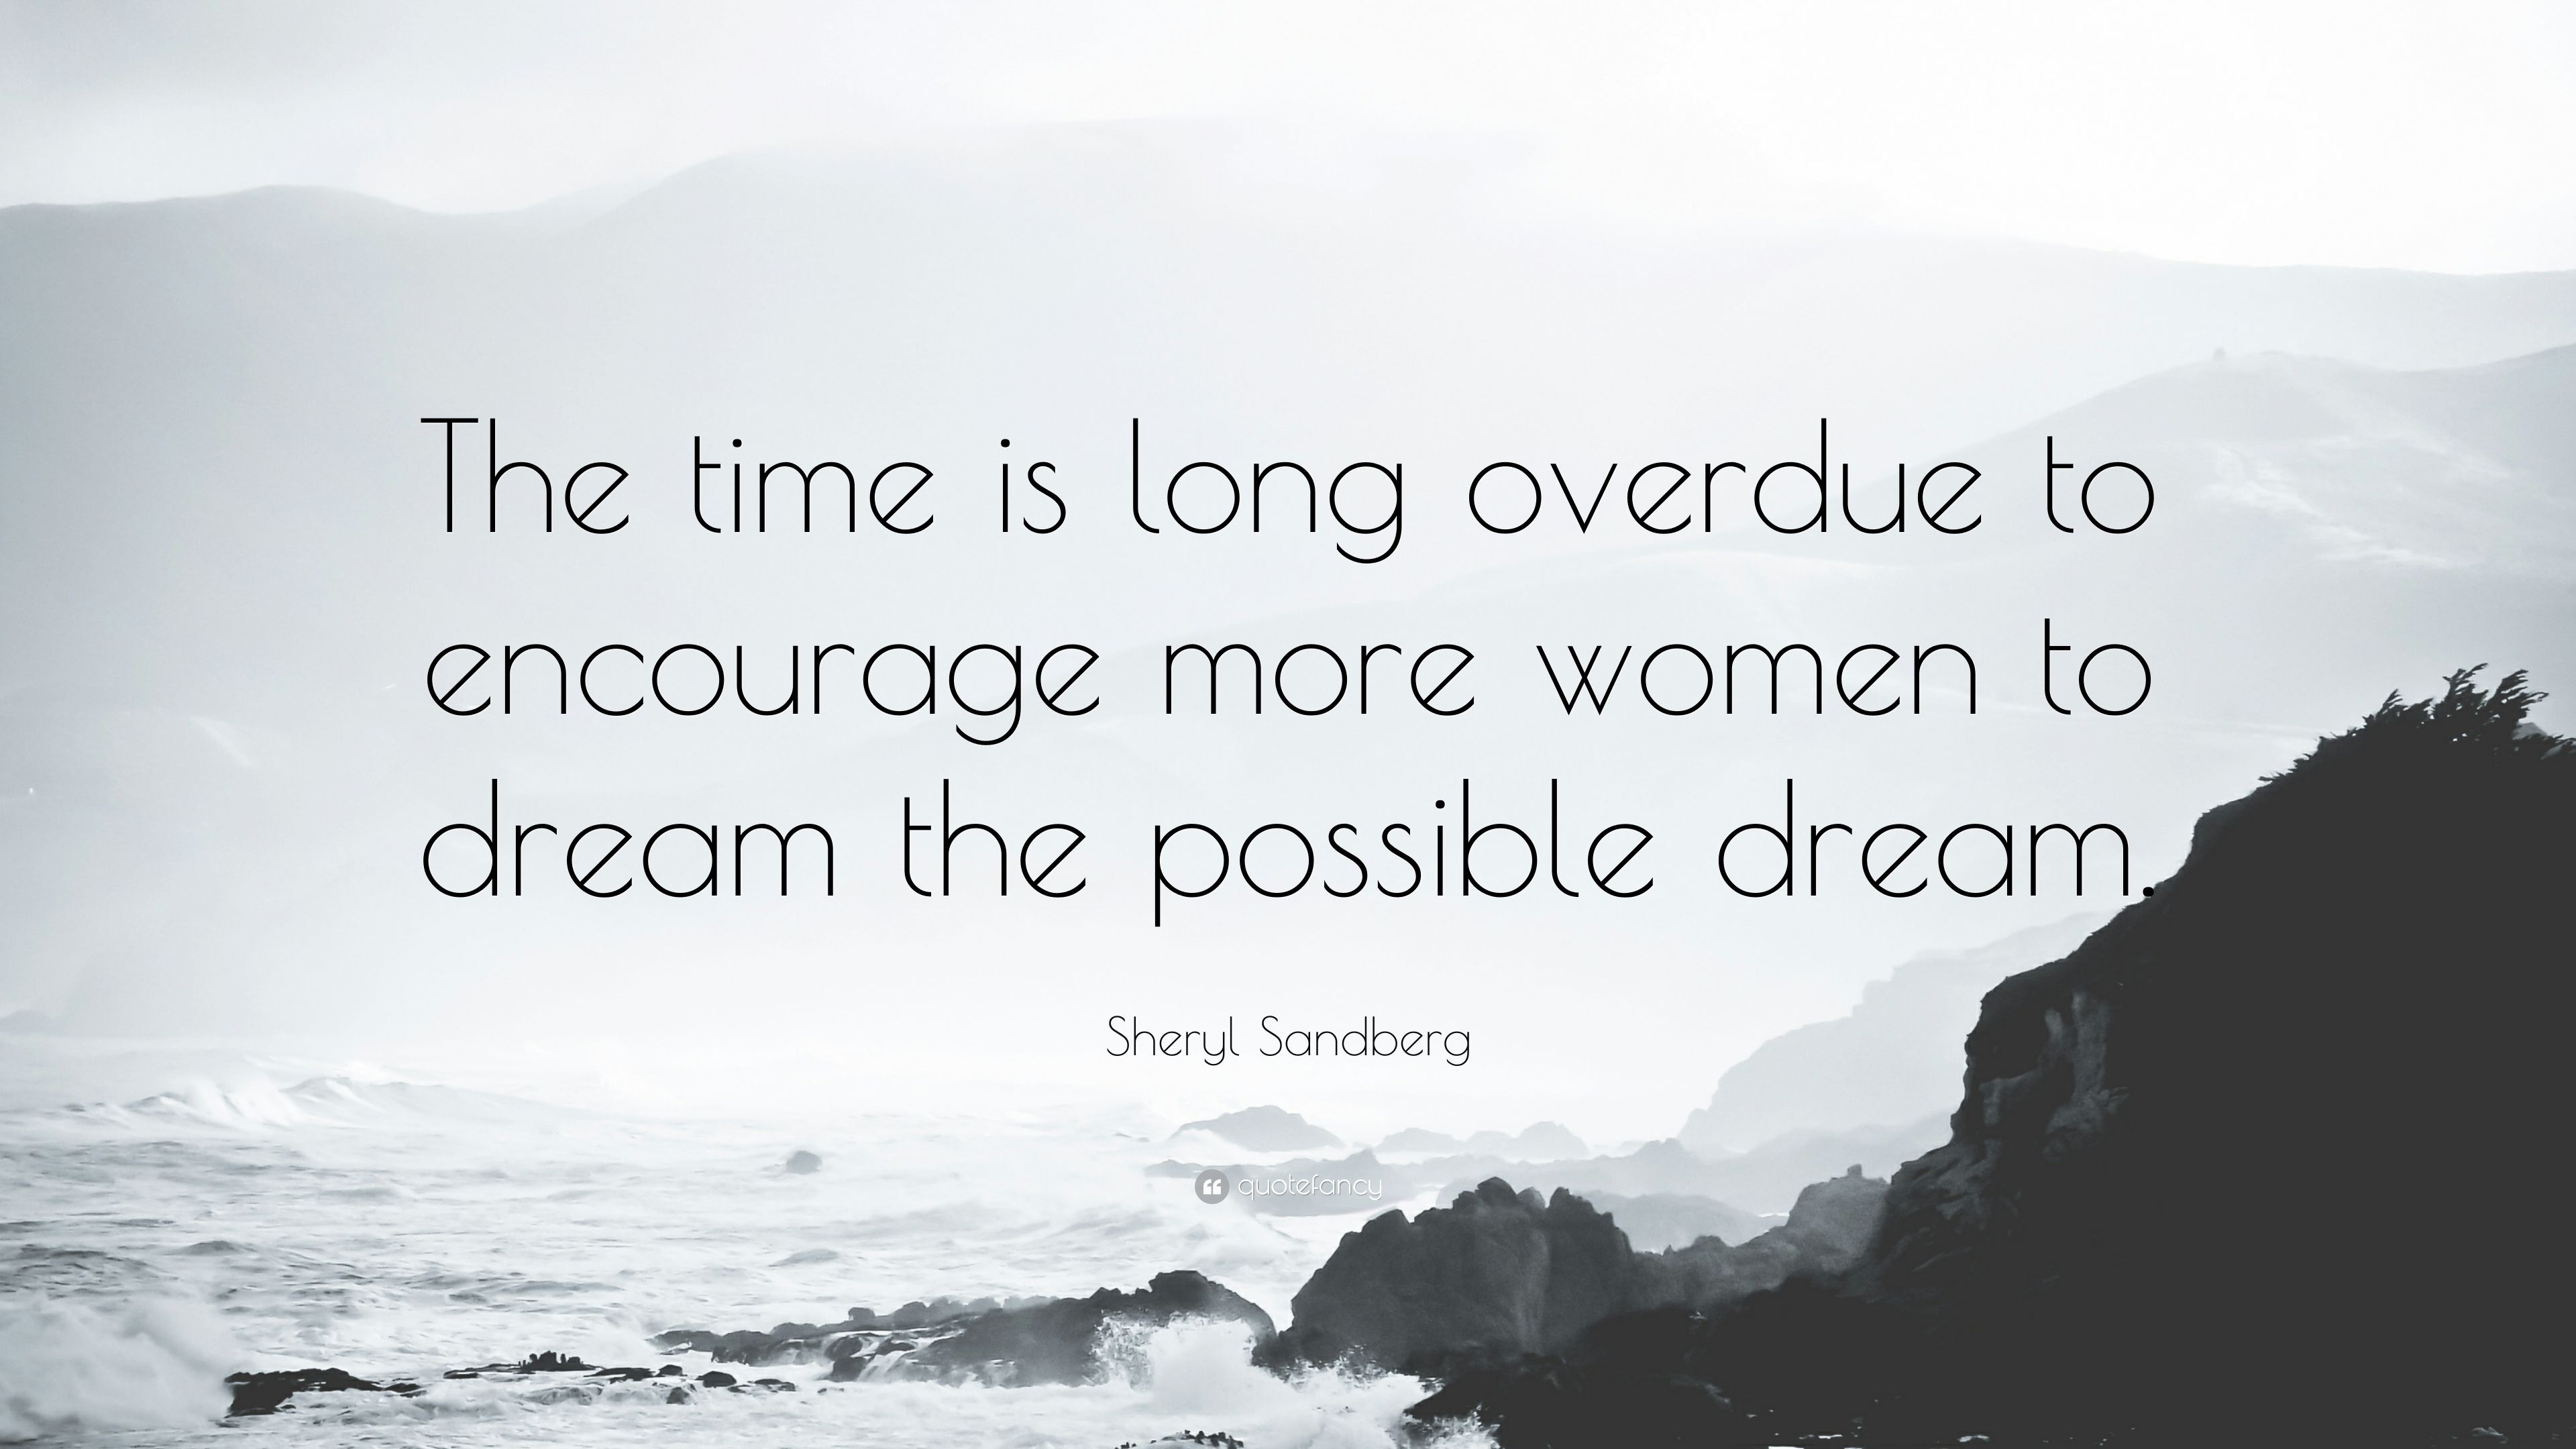 Sheryl Sandberg Quote: “The time is long overdue to encourage more